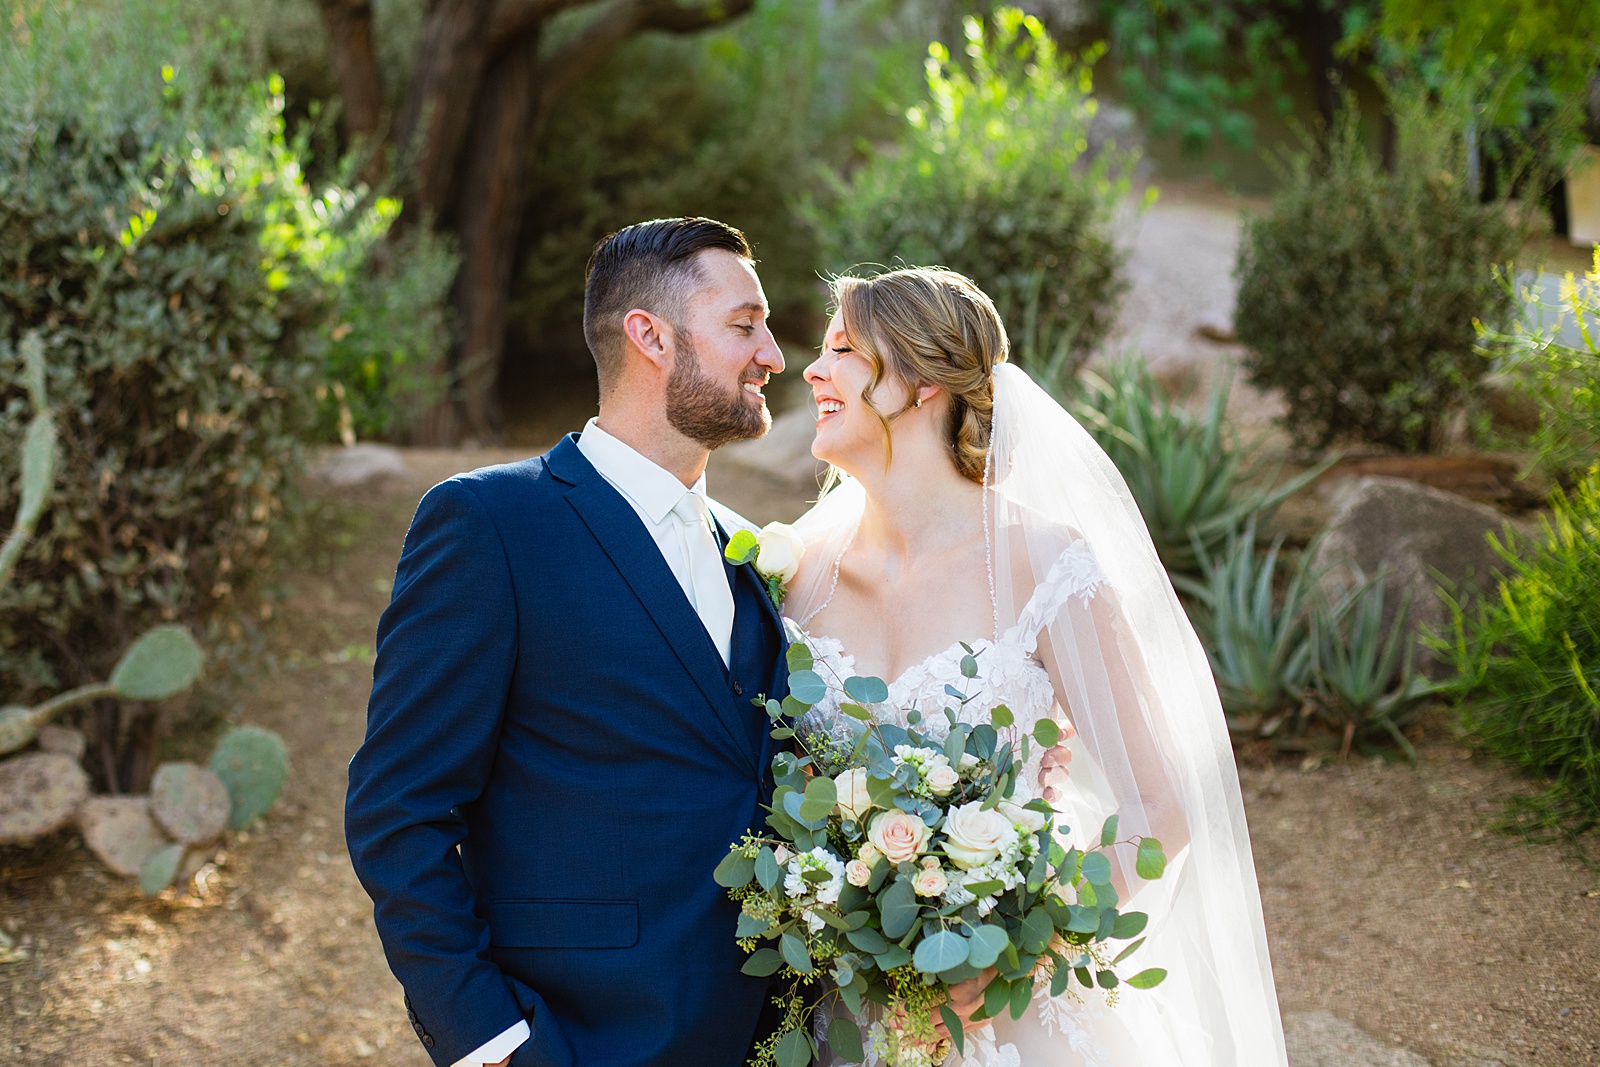 Bride & Groom share an intimate moment at their Sanctuary wedding by Arizona wedding photographer Juniper and Co Photography.